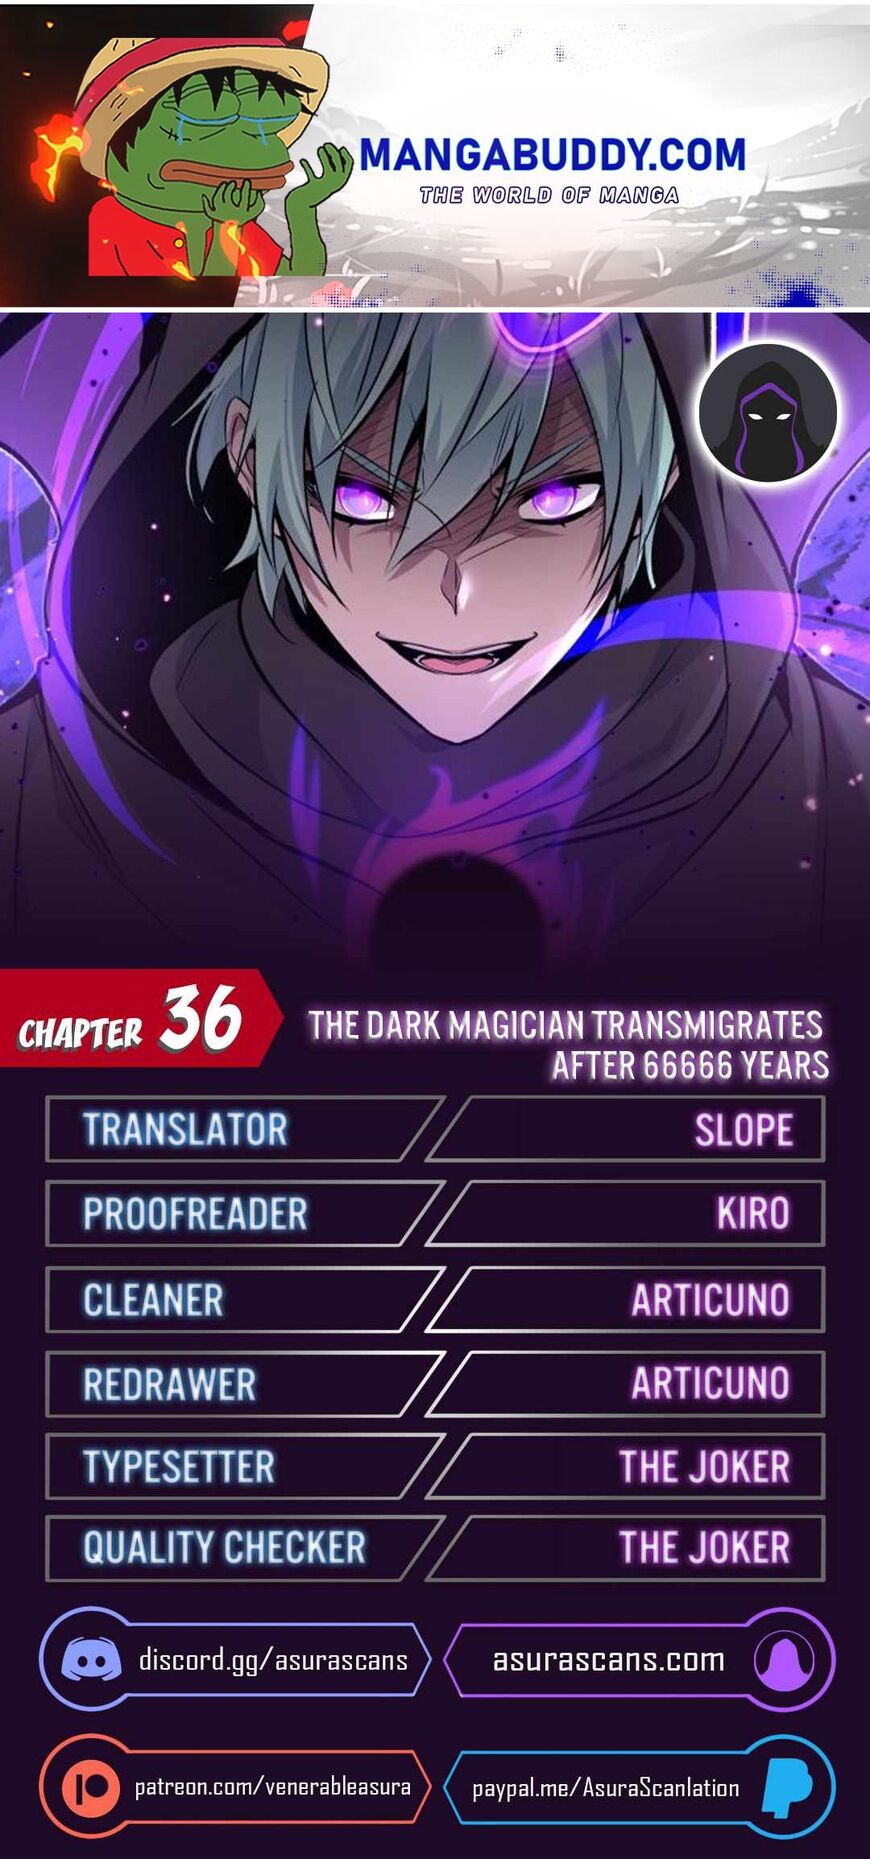 The Dark Magician Transmigrates After 66666 Years 36